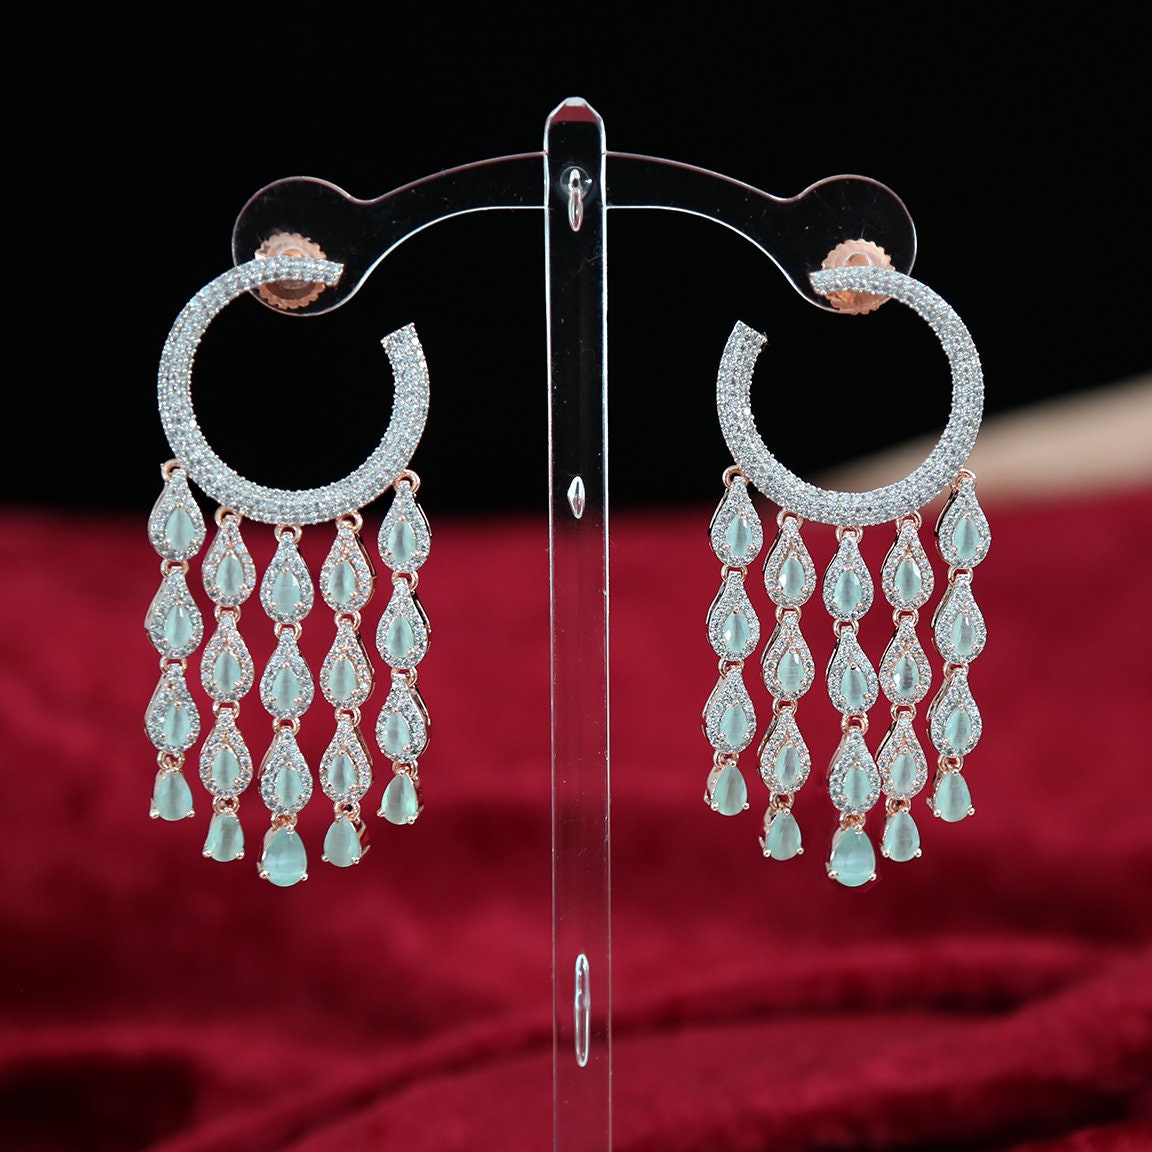 Buy Danglers Earrings online at Best Prices | Starting at ₹150